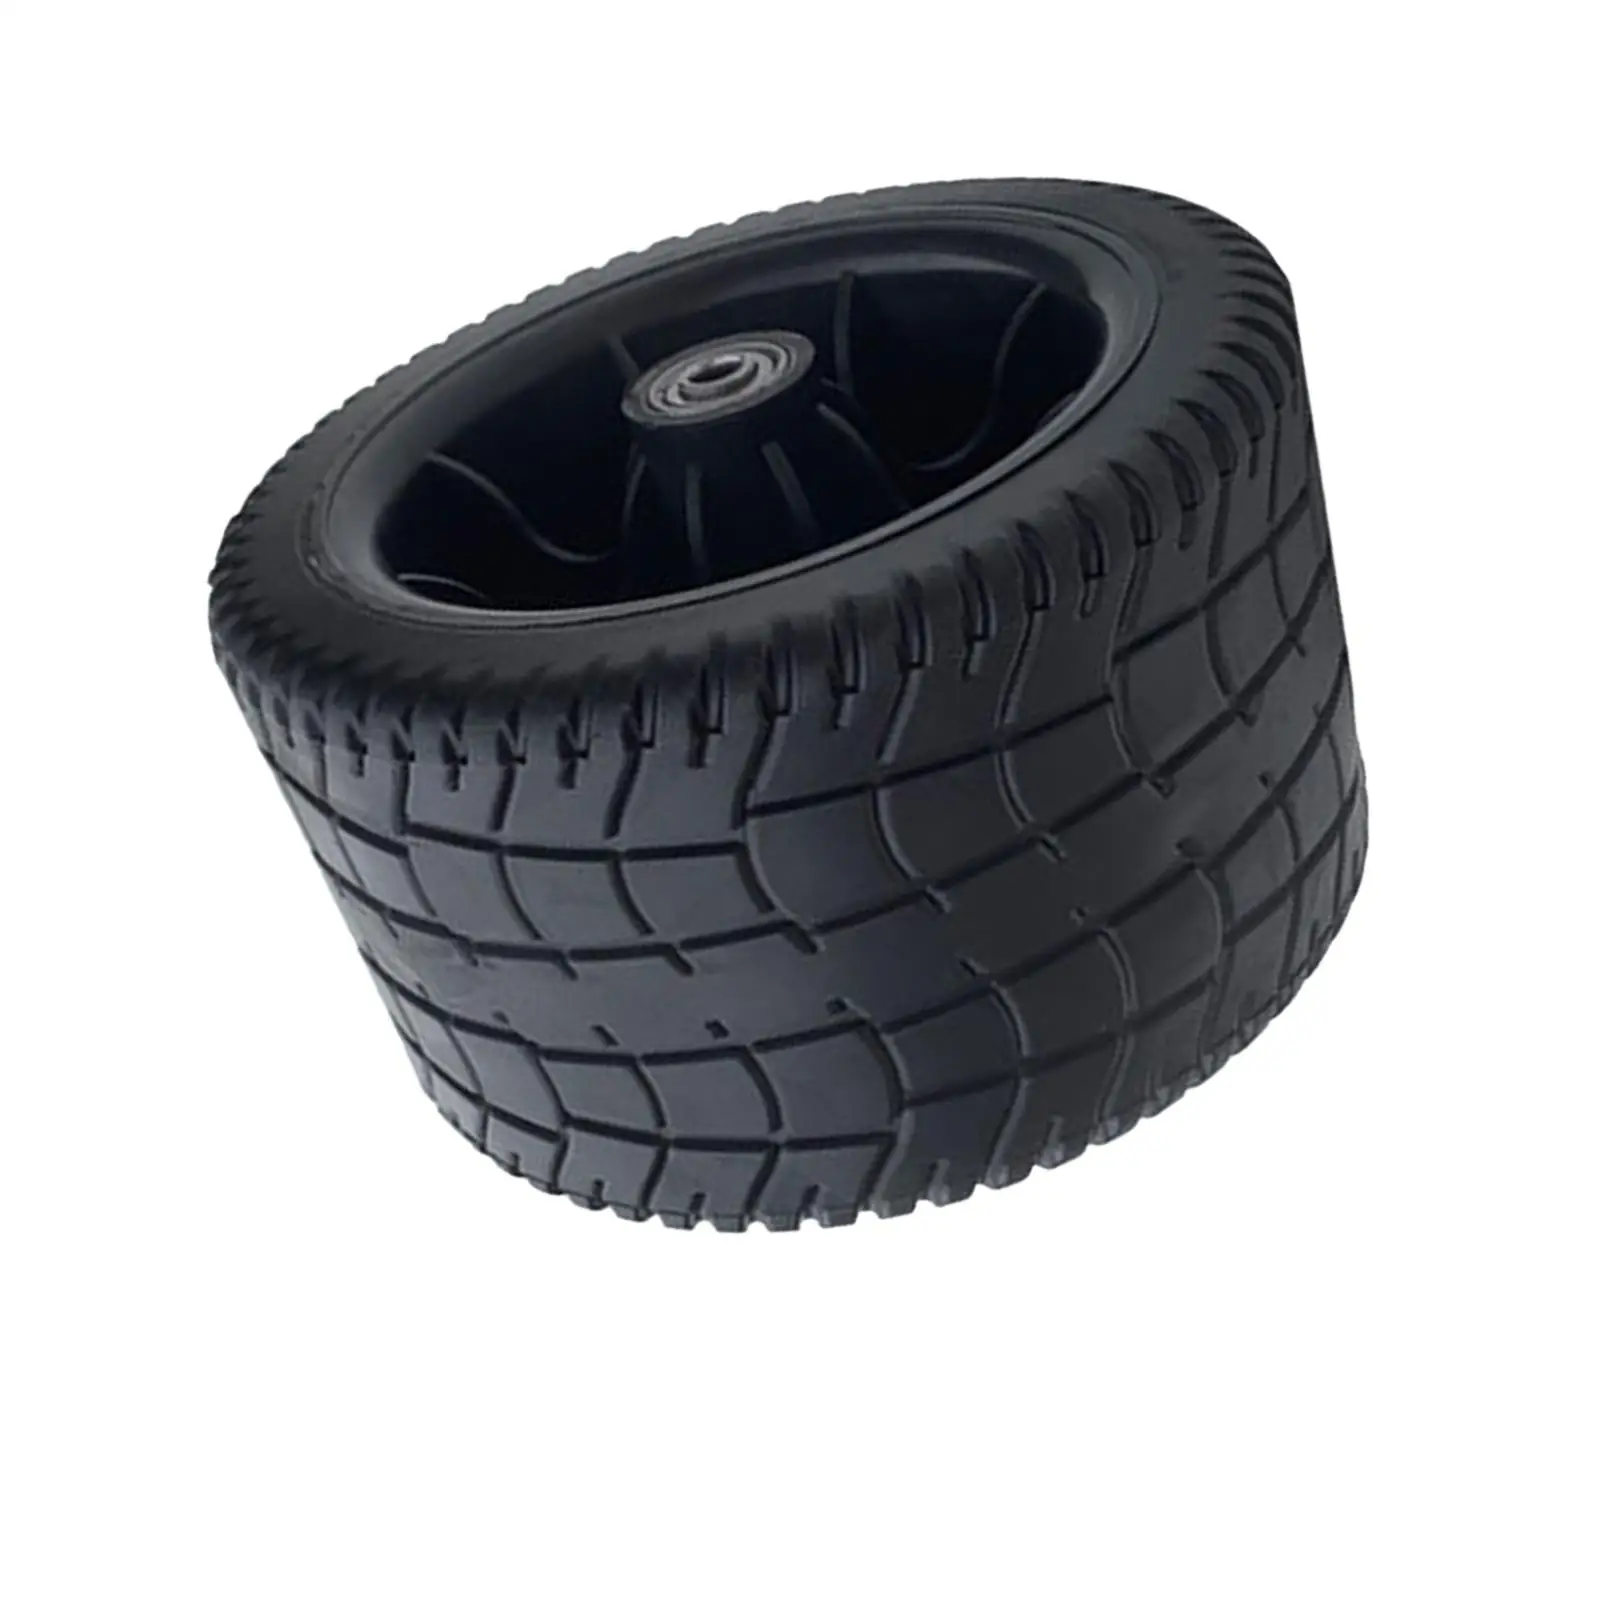 4inch Wide Wagon Cart Wheel PP Tires Sturdy Smooth Rolling Diameter 6.3inch for Shopping Cart